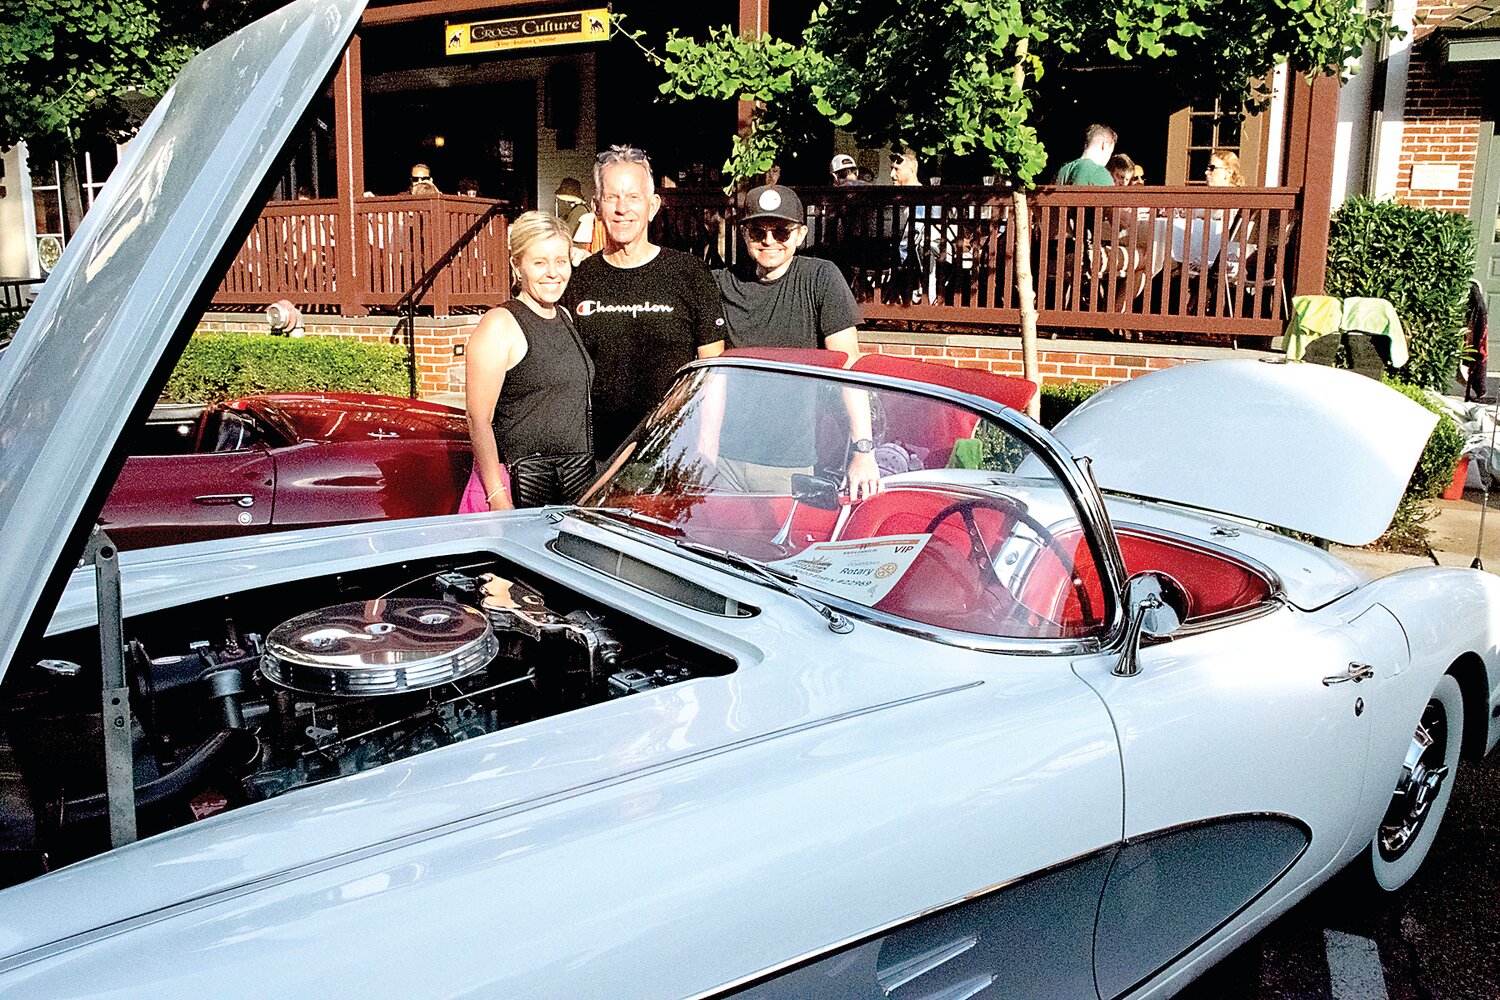 Bill Rowe with his family and his 1959 Corvette, one of the Top 40 Award winners.